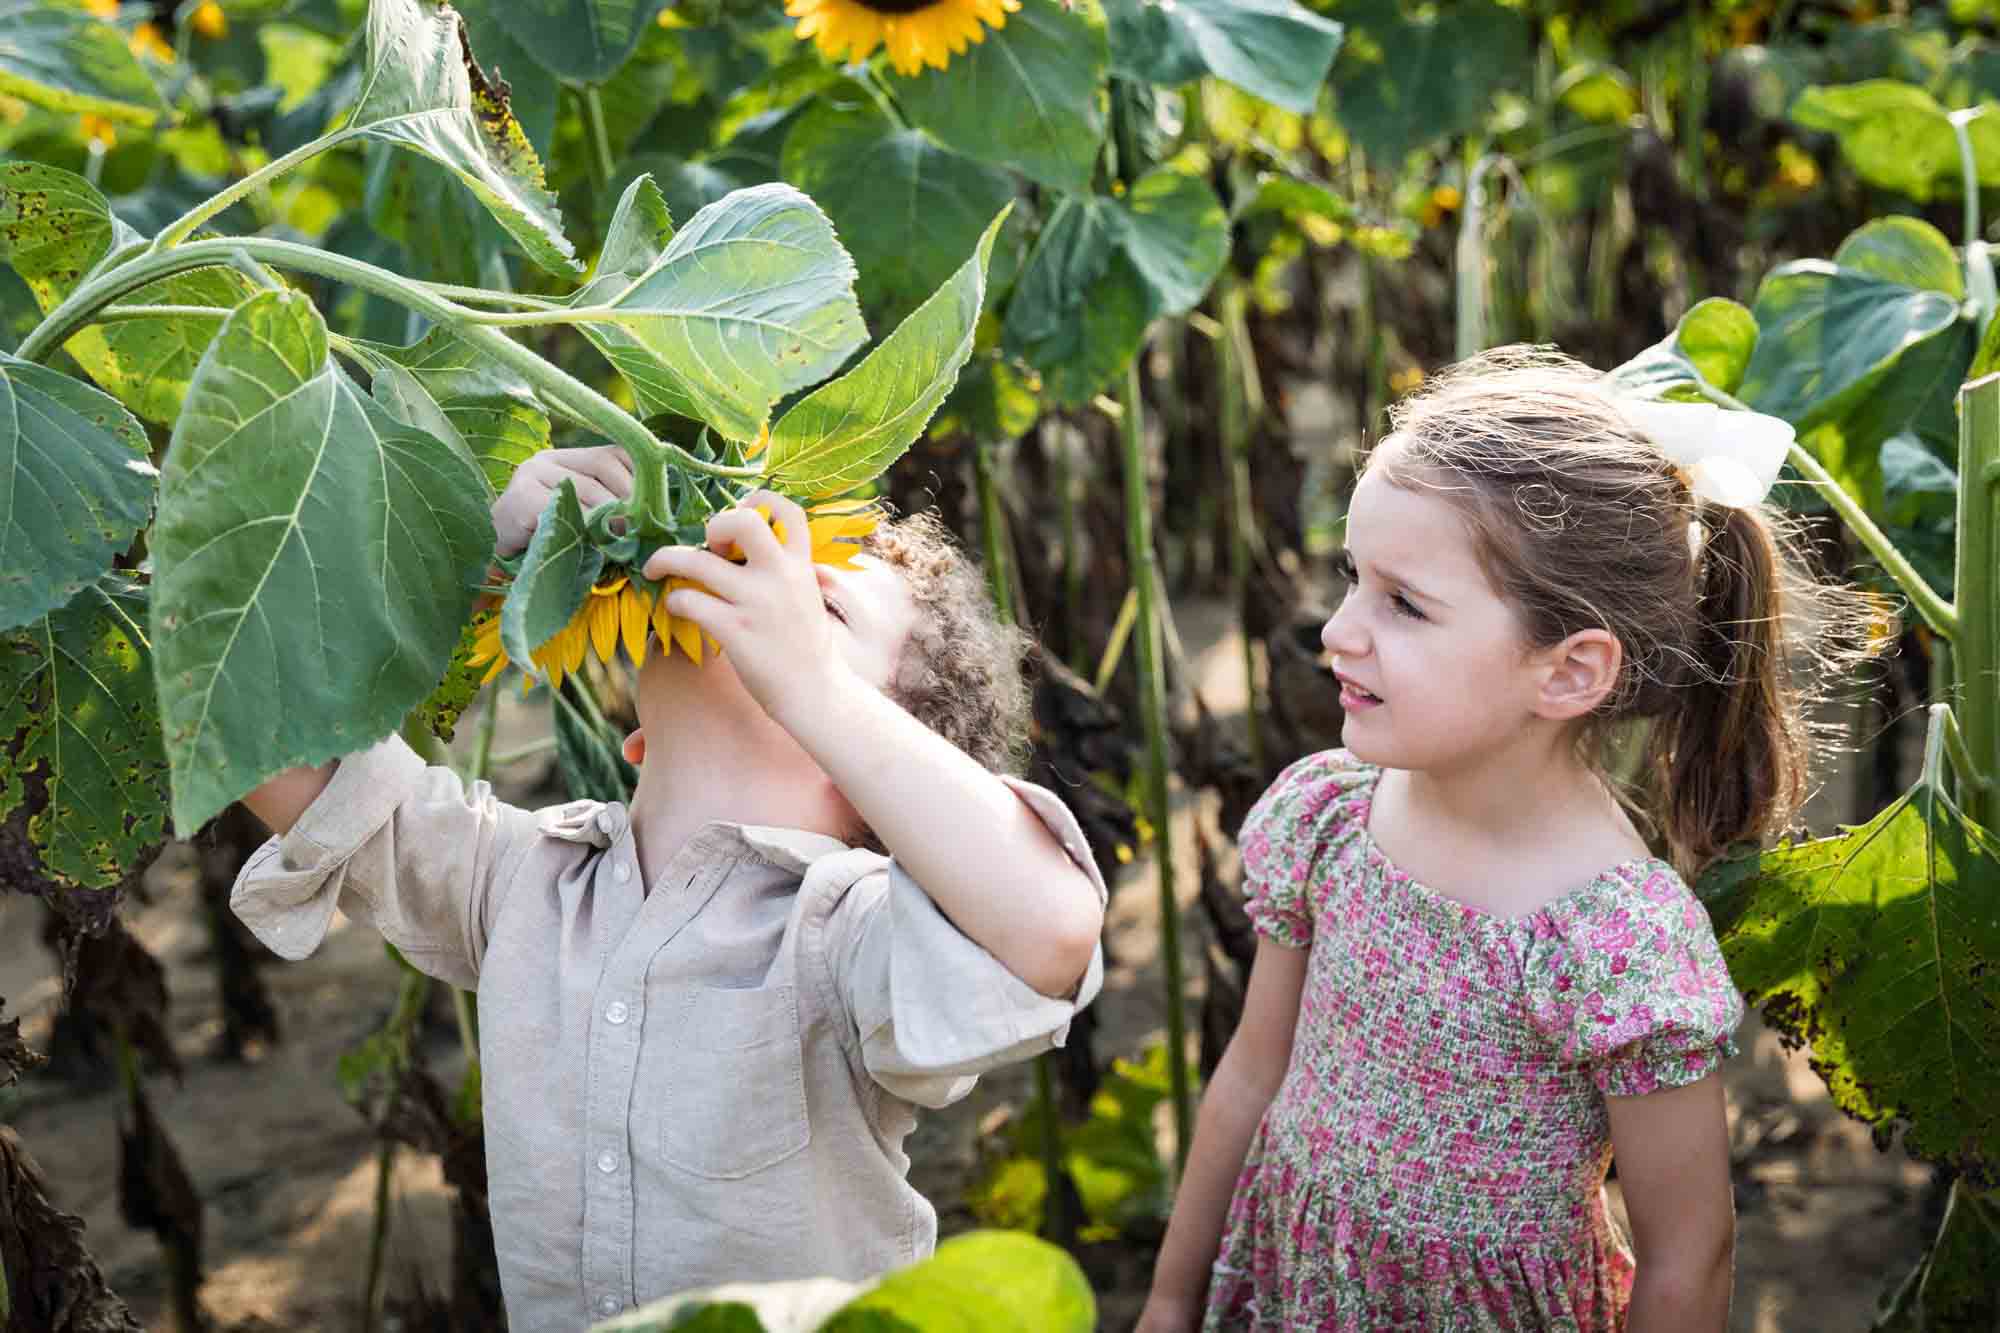 Kids playing with sunflowers